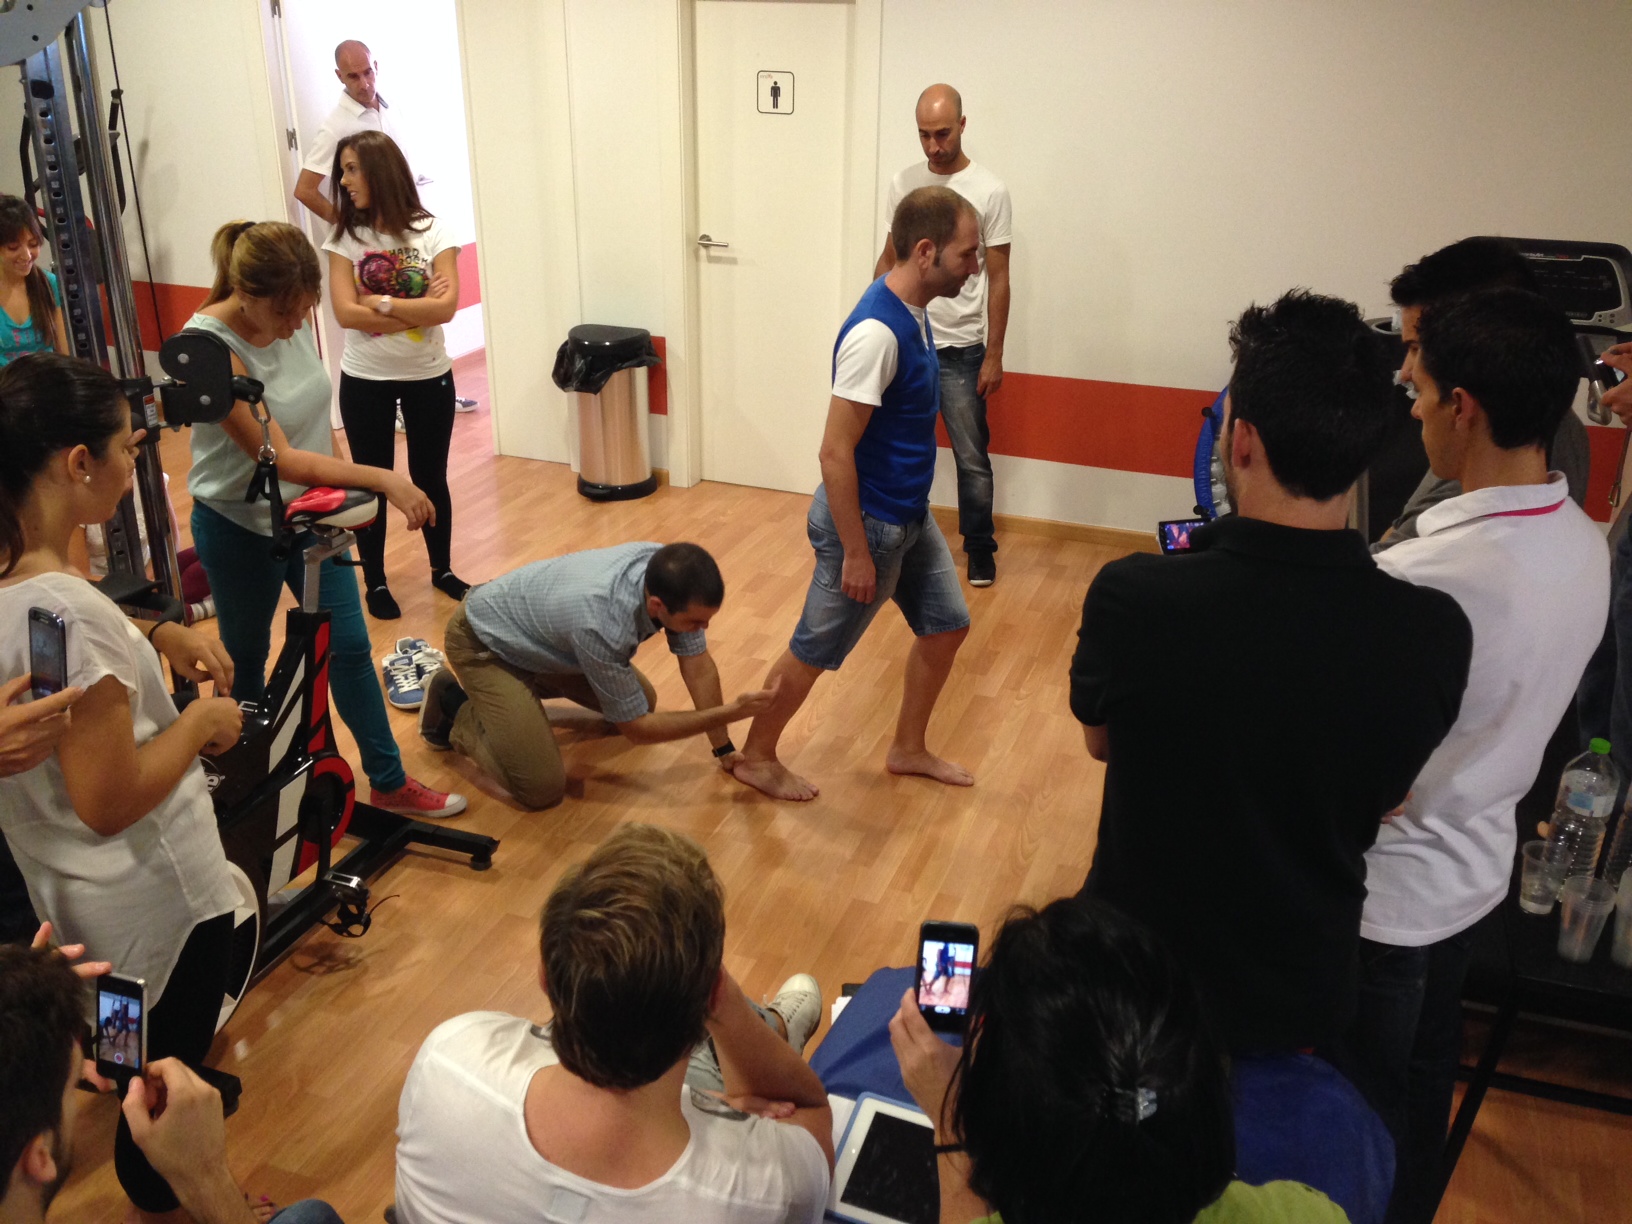 Image: Dr Peter Malliaras in action, hosting a class demonstration of Achilles Tendinopathy rehab exercises.